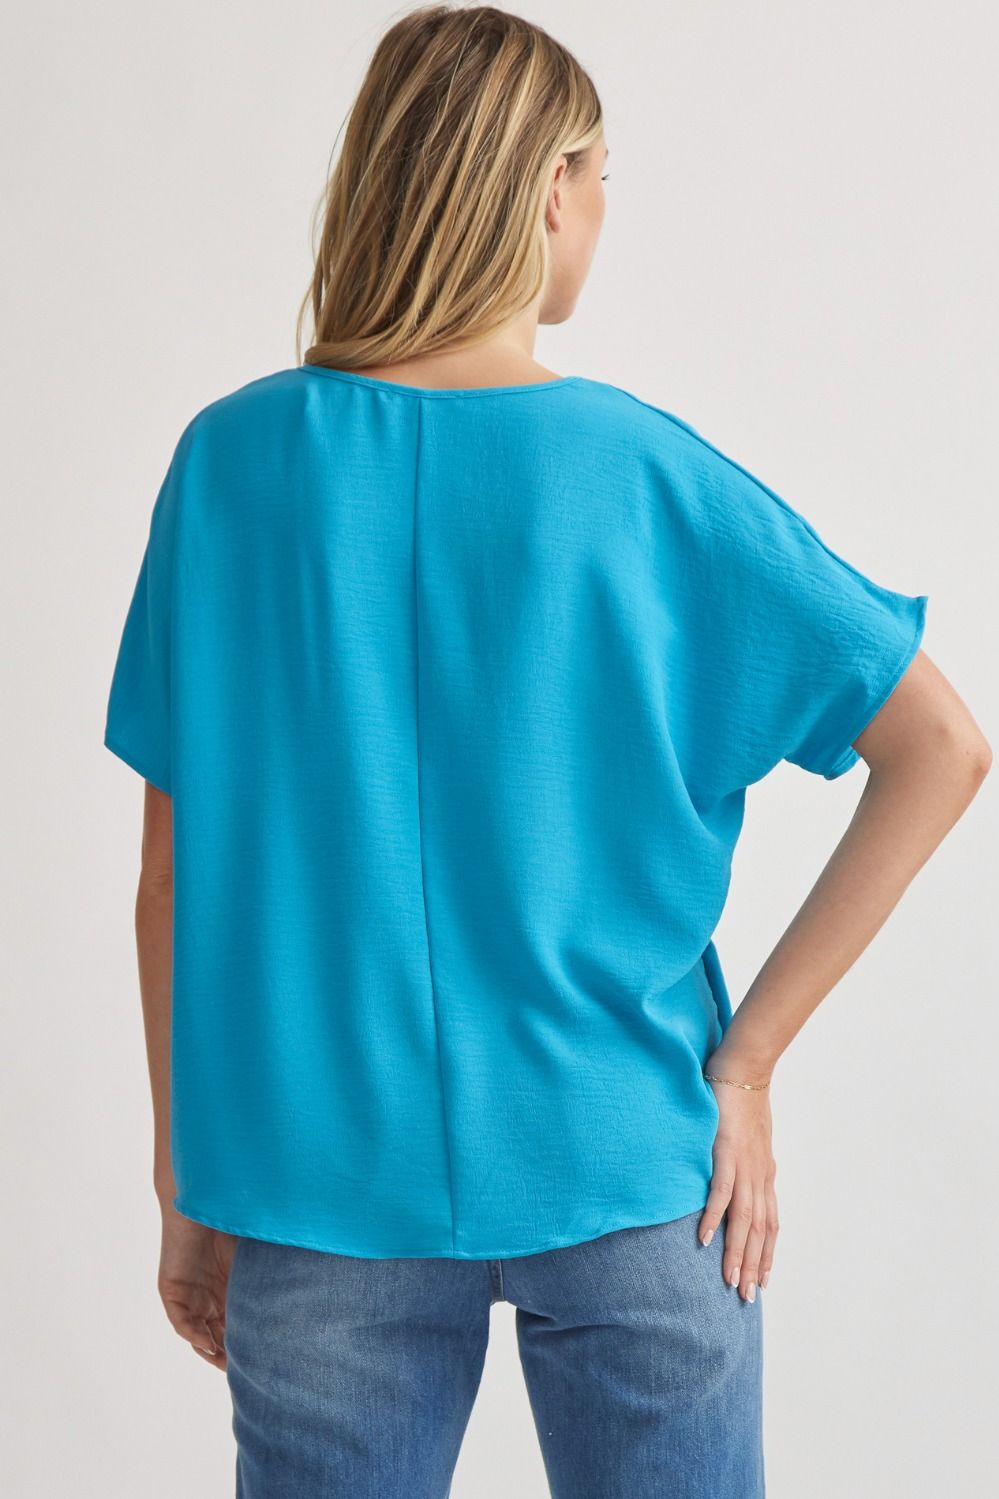 "Everyday Charm" Top (Turquoise) - Happily Ever Aften